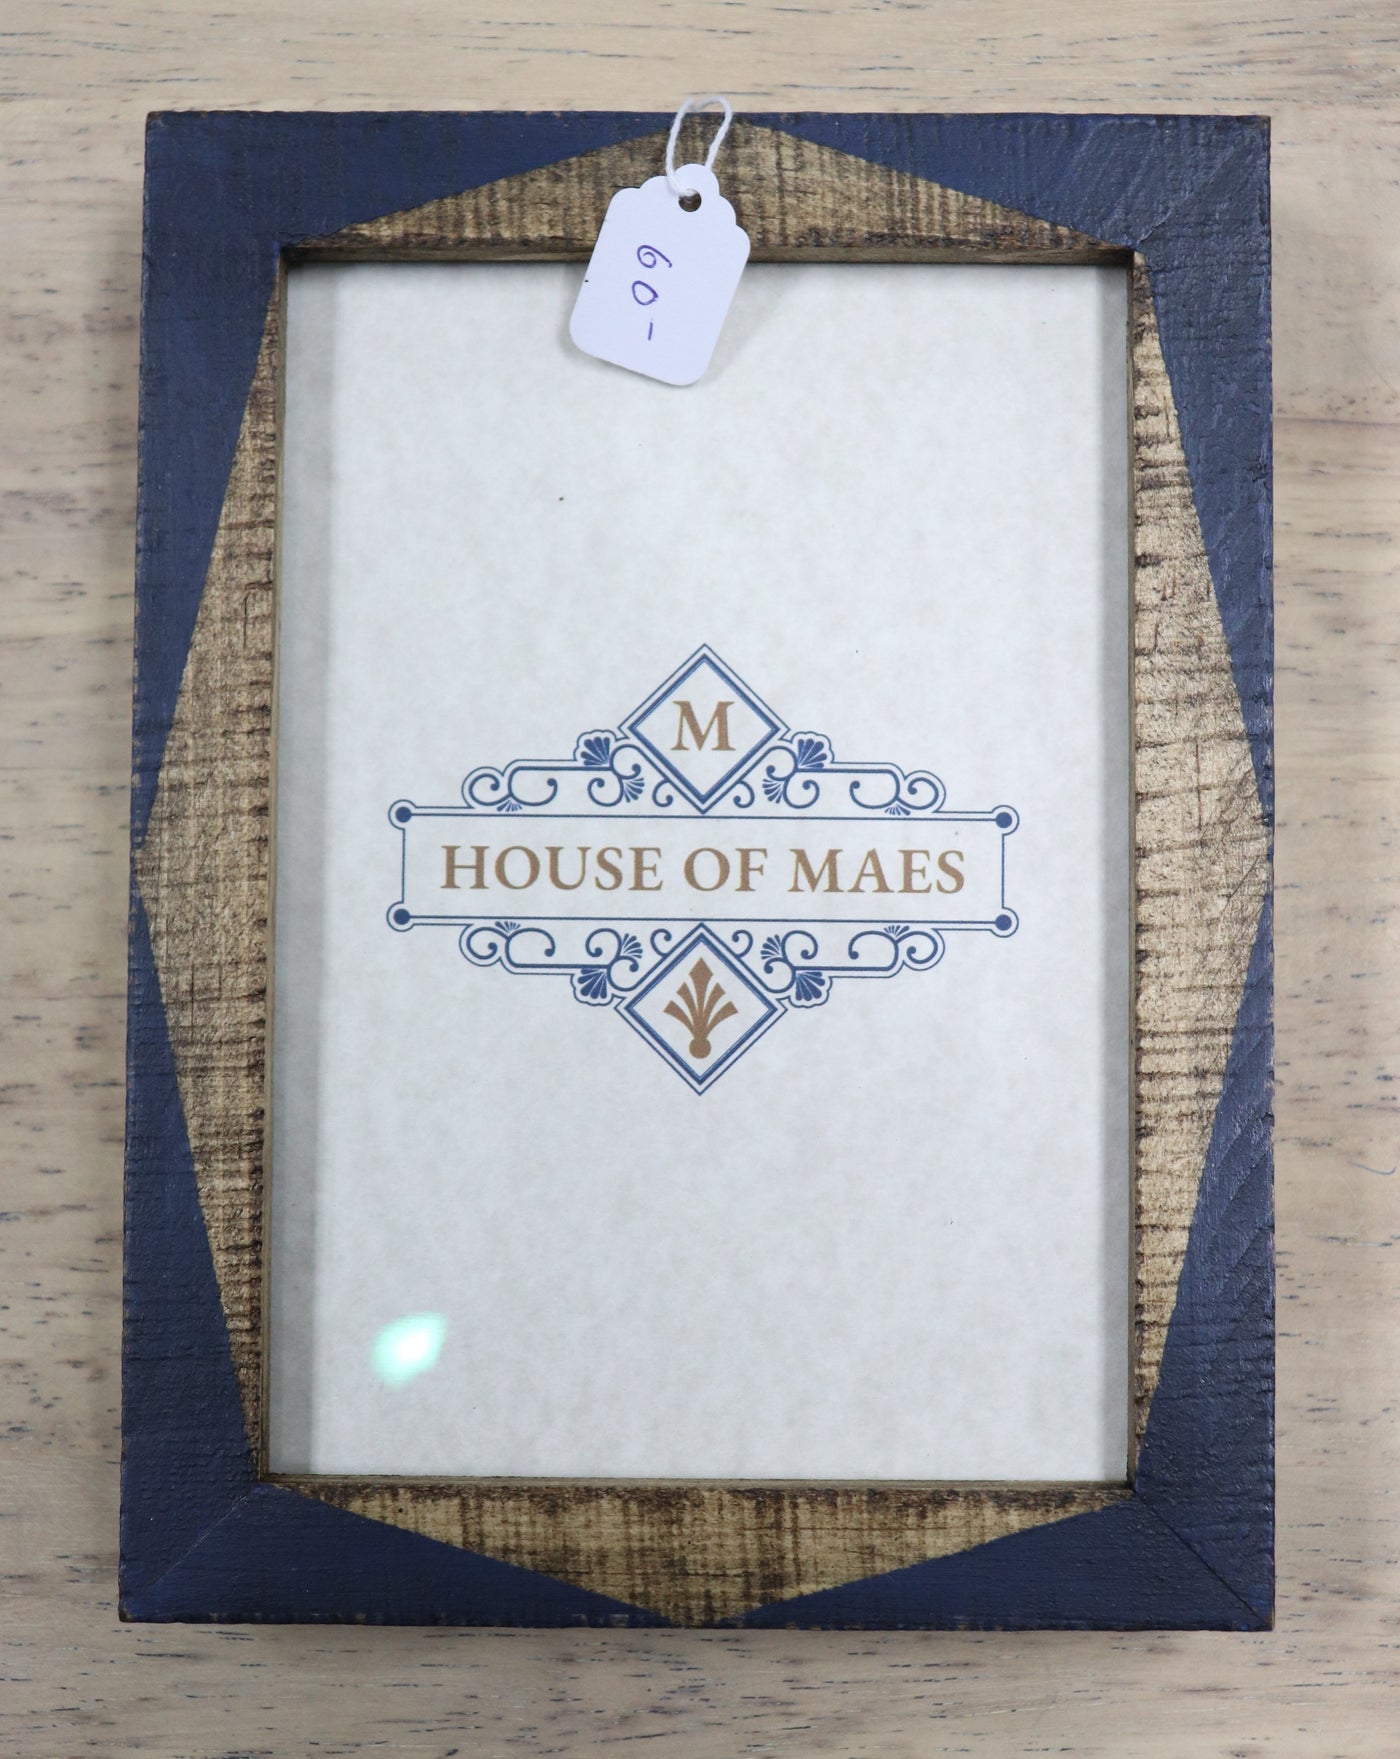 5" x 7" Blue Museum Glass Photo Frame- House of Maes